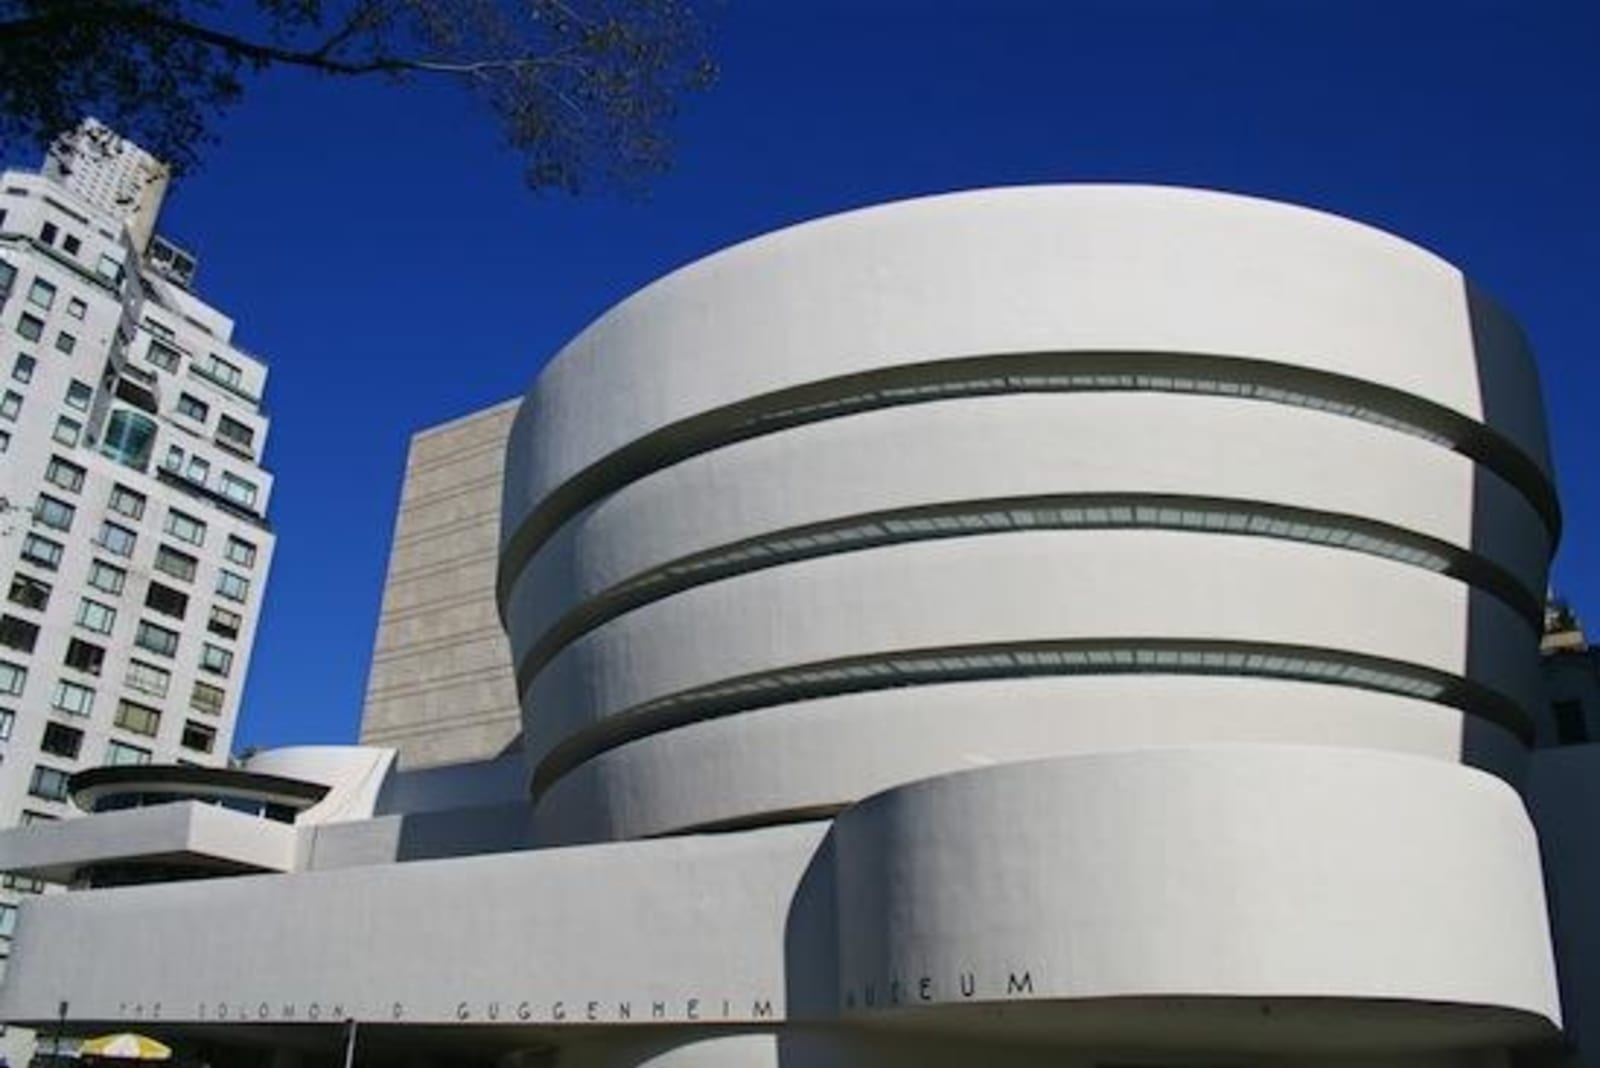 Solomon R. Guggenheim Museum - a white cone-shaped museum in New York